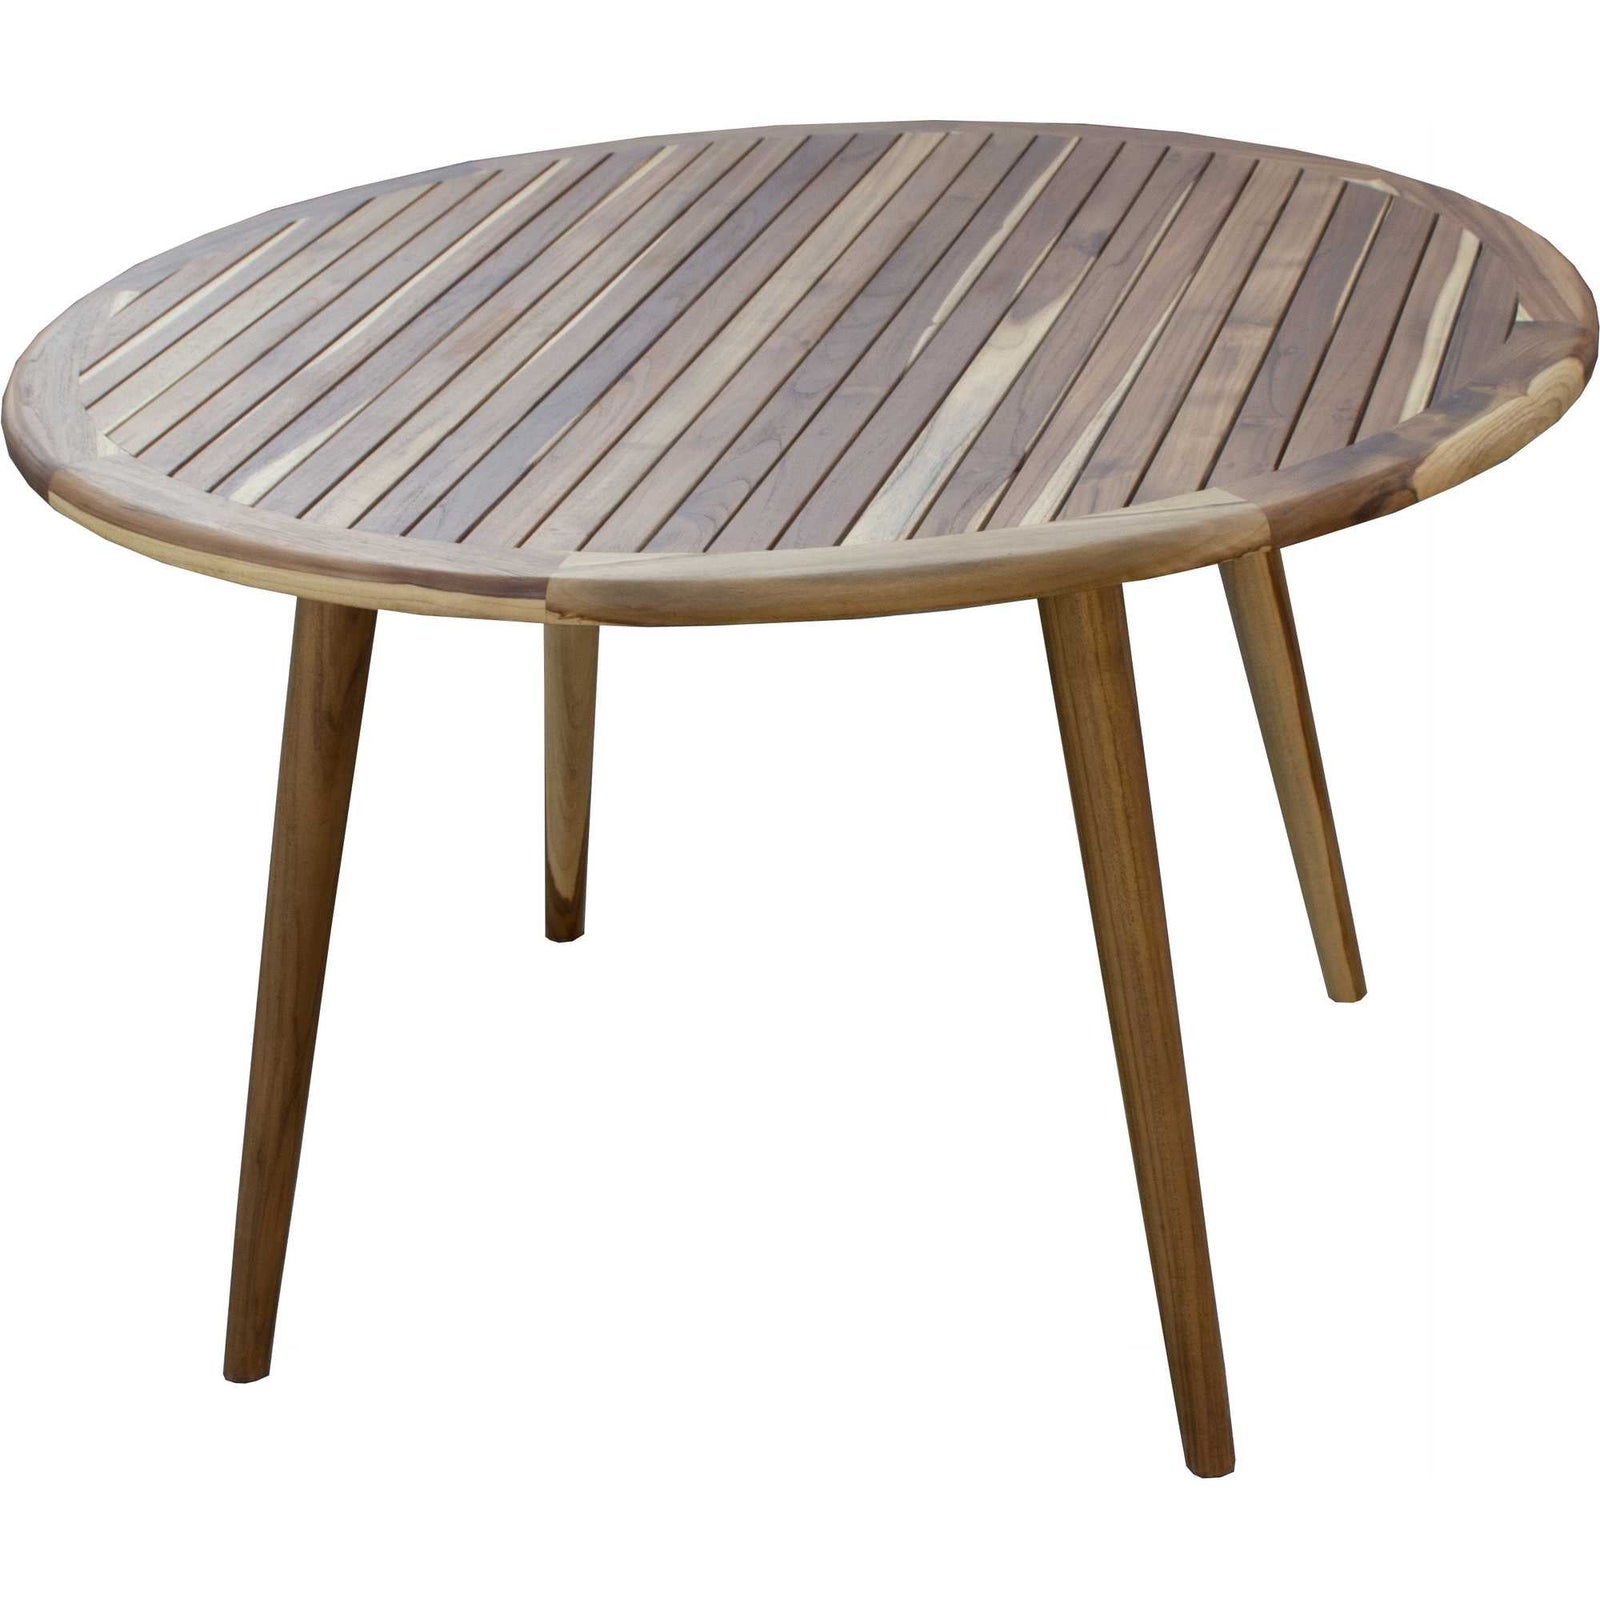 Round Compact Teak Dining Table in Natural Finish 37"